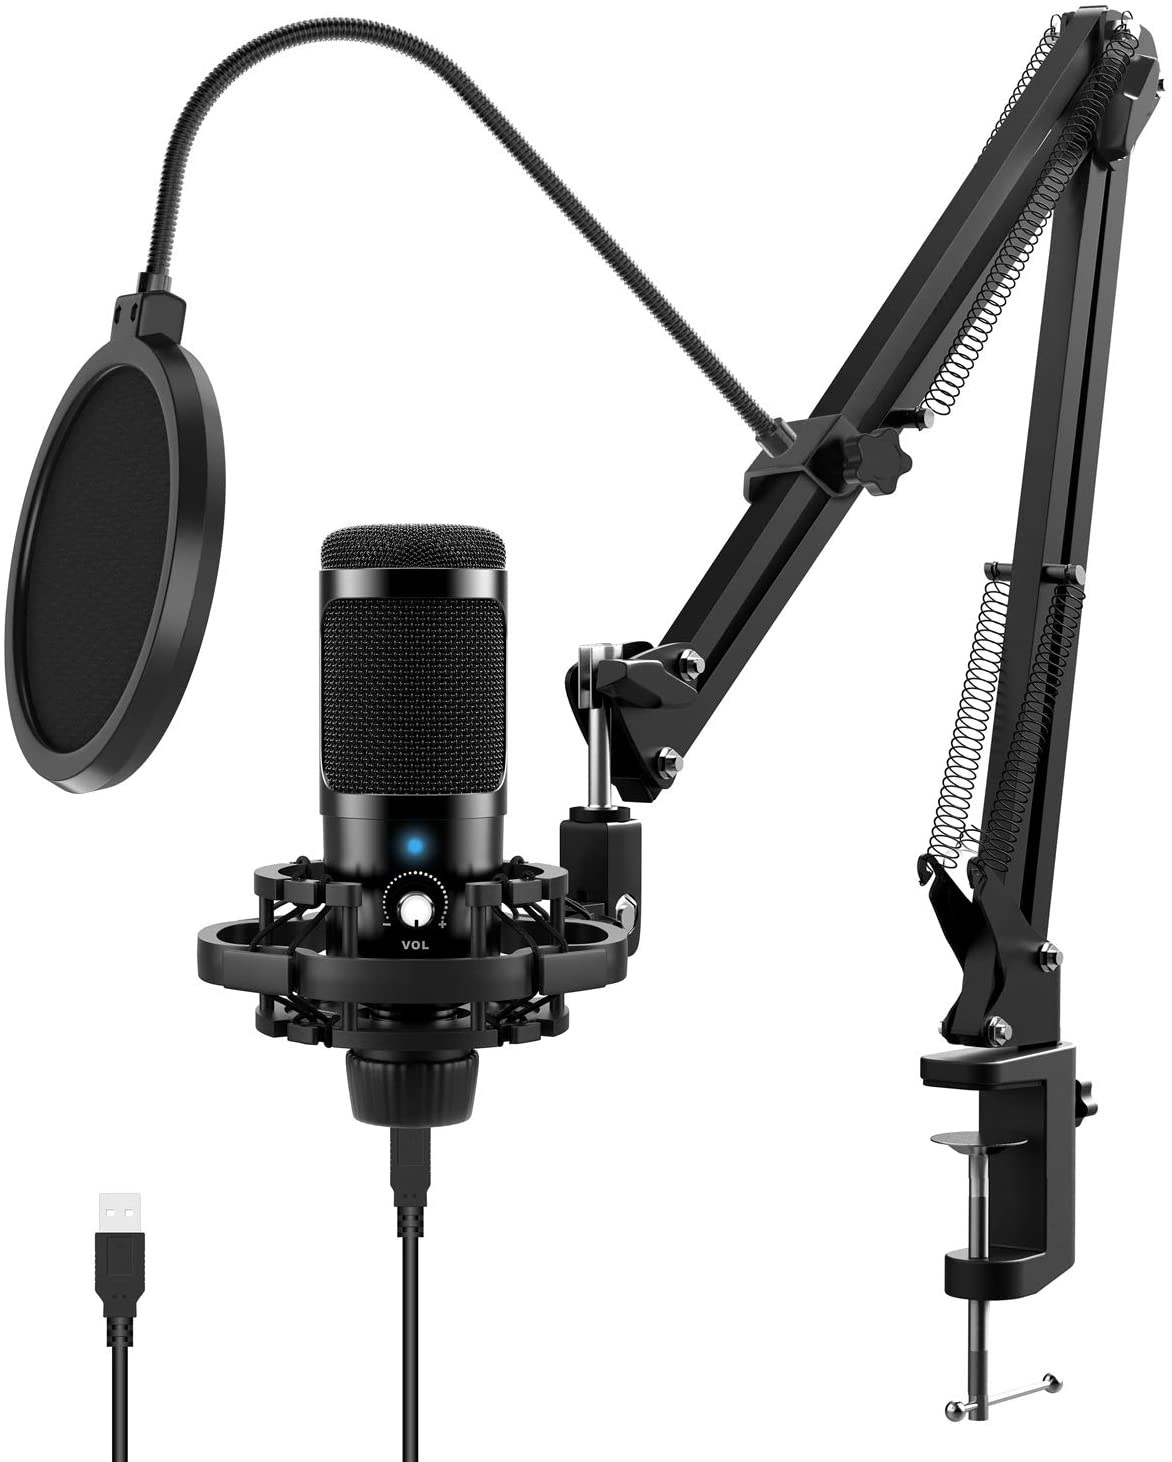 the microphone stand, microphone, and shock mount